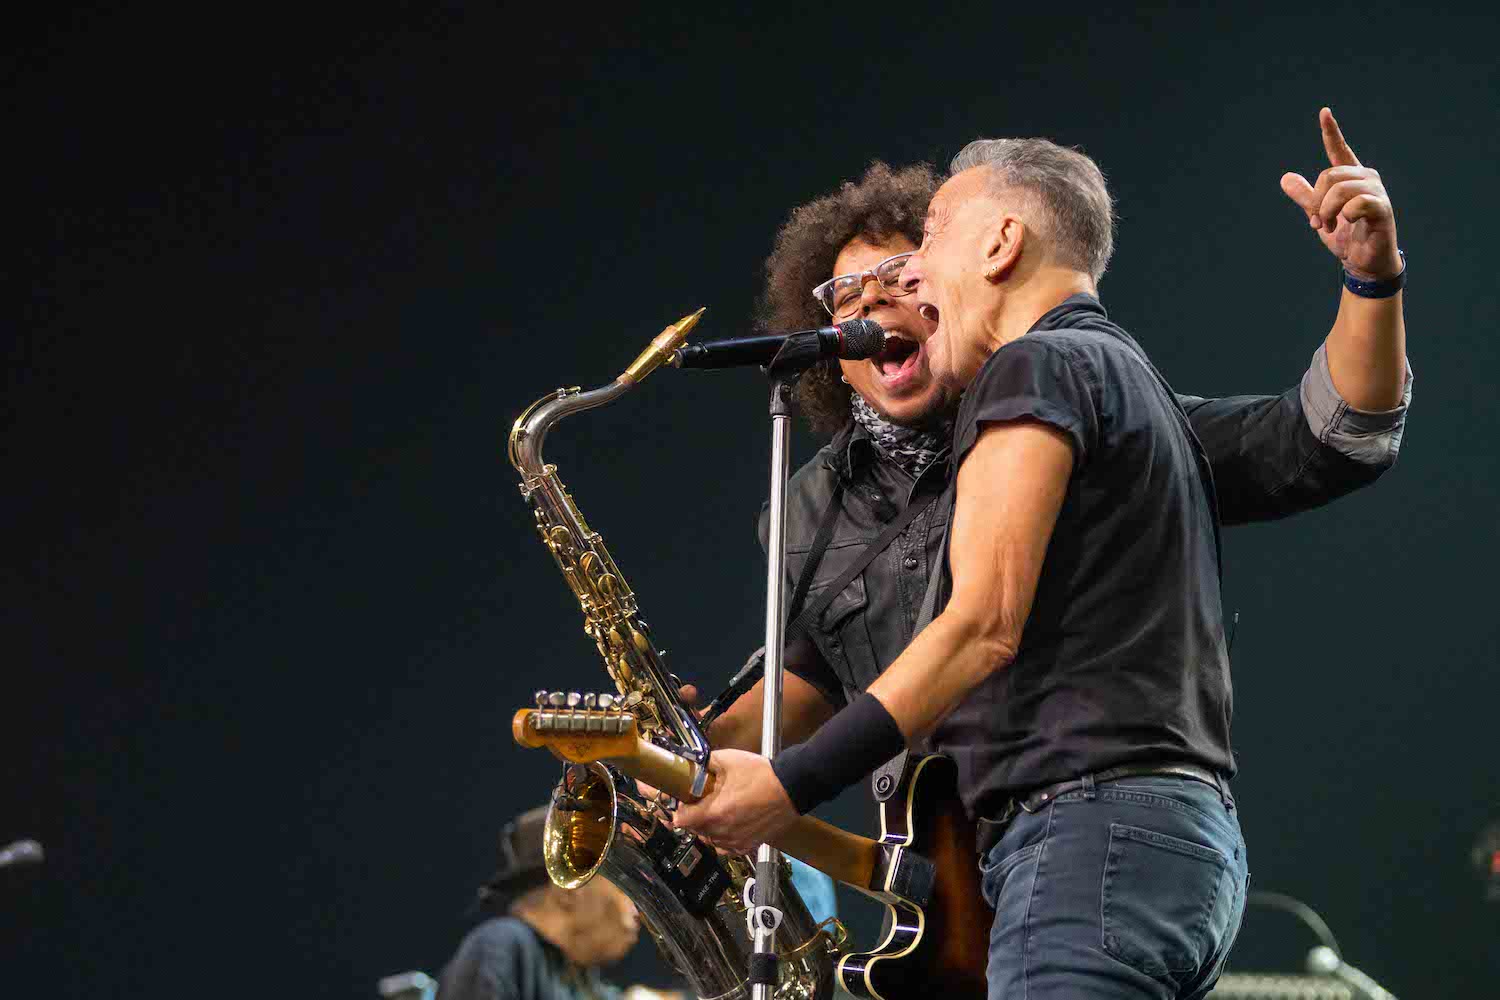 Bruce Springsteen & E Street Band at CFG Bank Arena, Baltimore, MD on April 7, 2023.